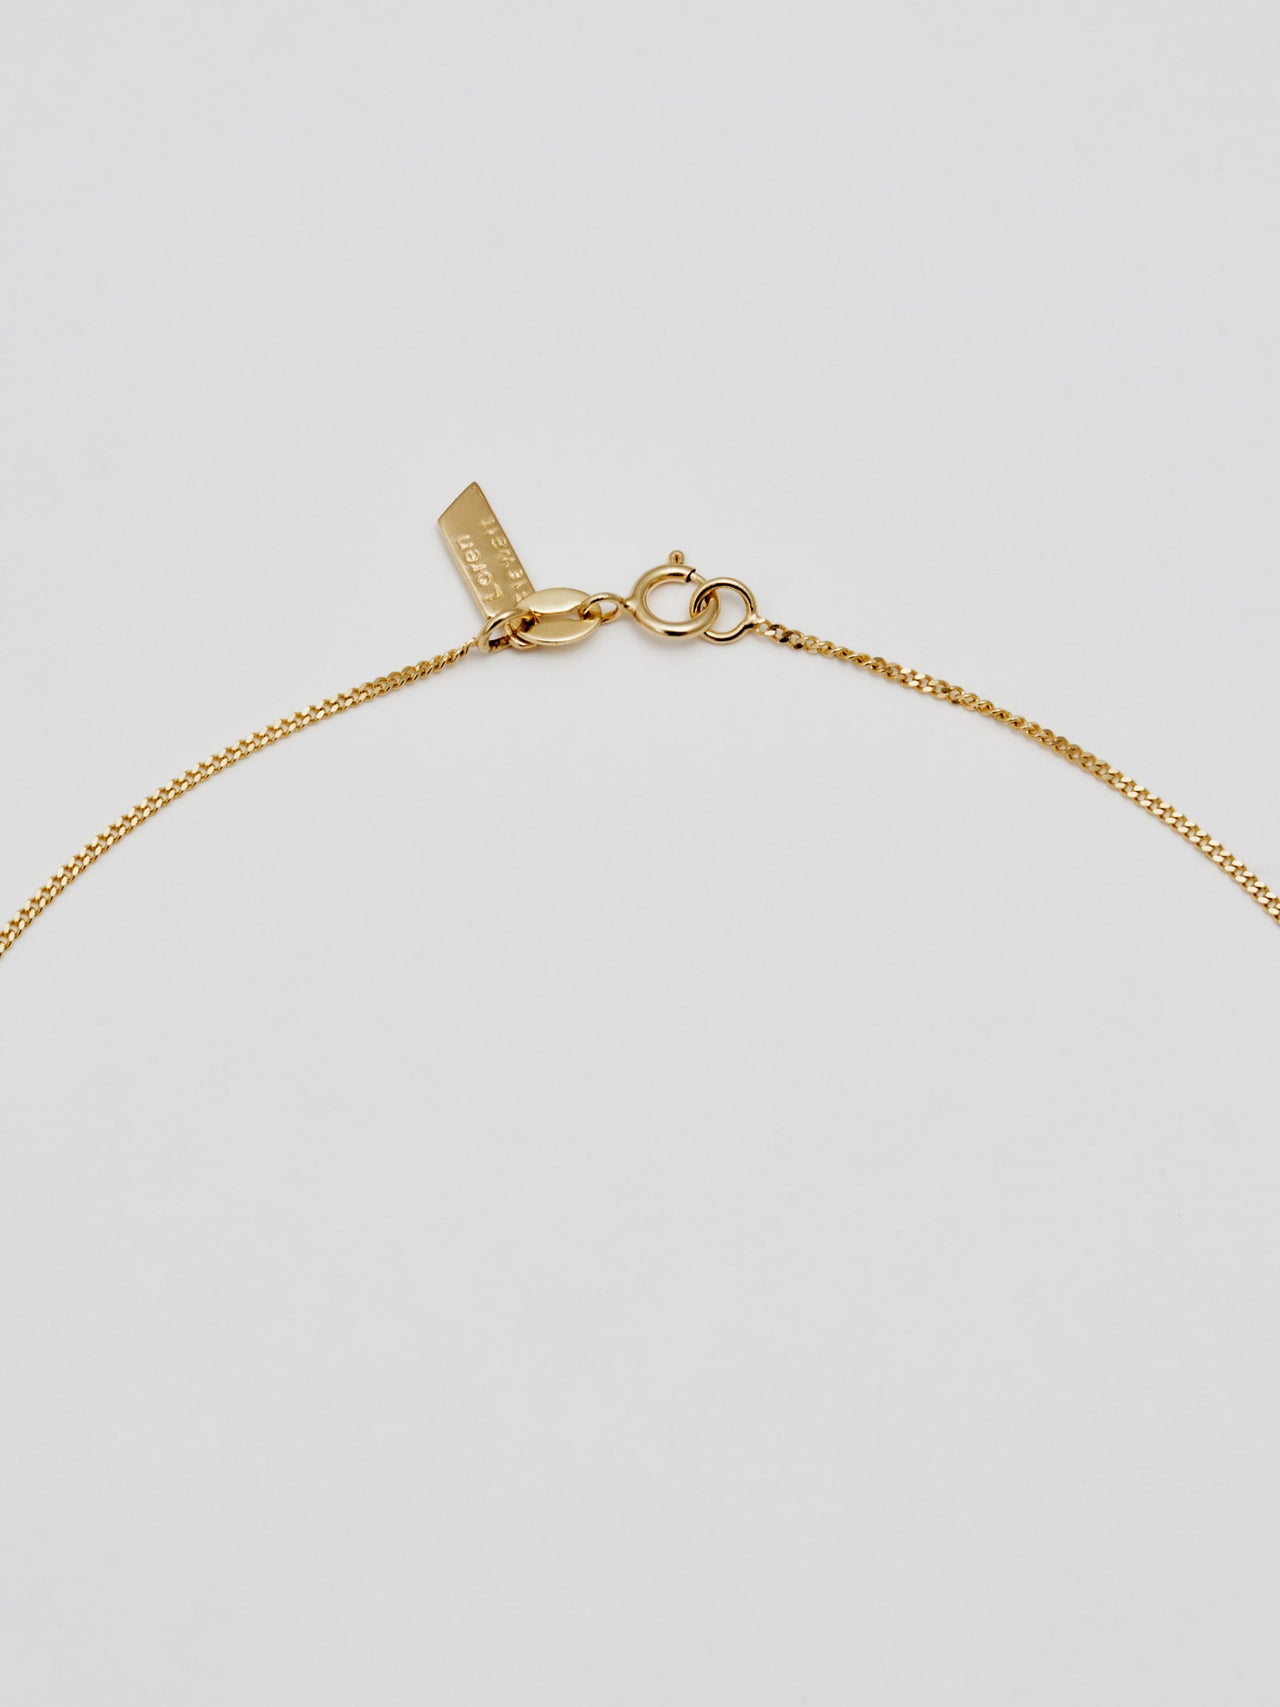 Close up of clasp  on Thin Curb Chain: 14Kt Yellow Gold Thin Curb Chain 